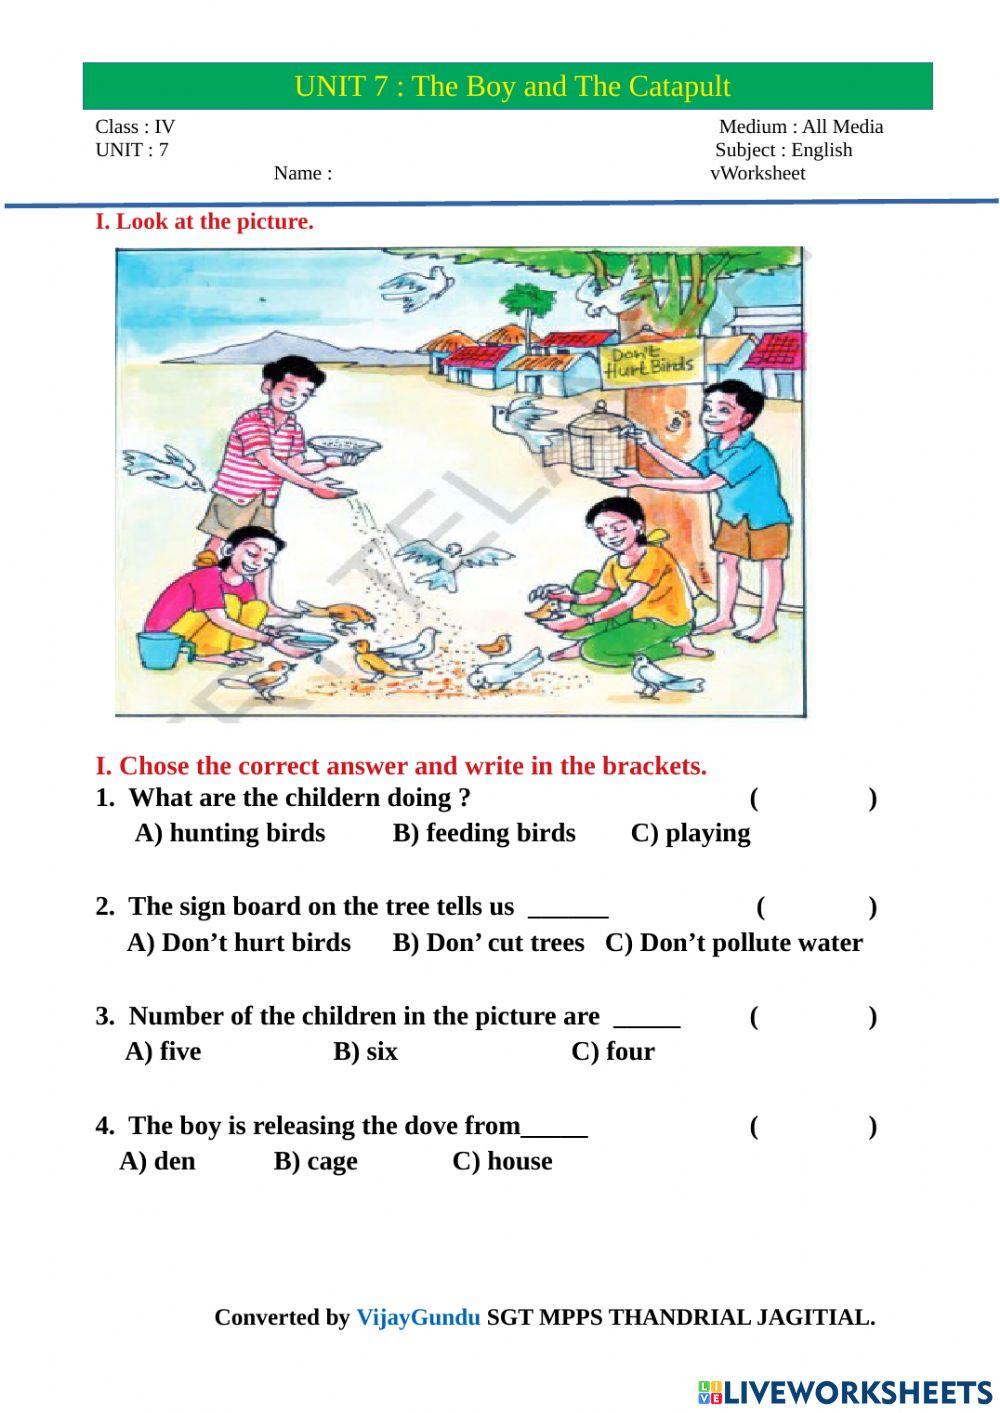 4th eng the boy and the catupult pre reading 1 by Vijay Gundu